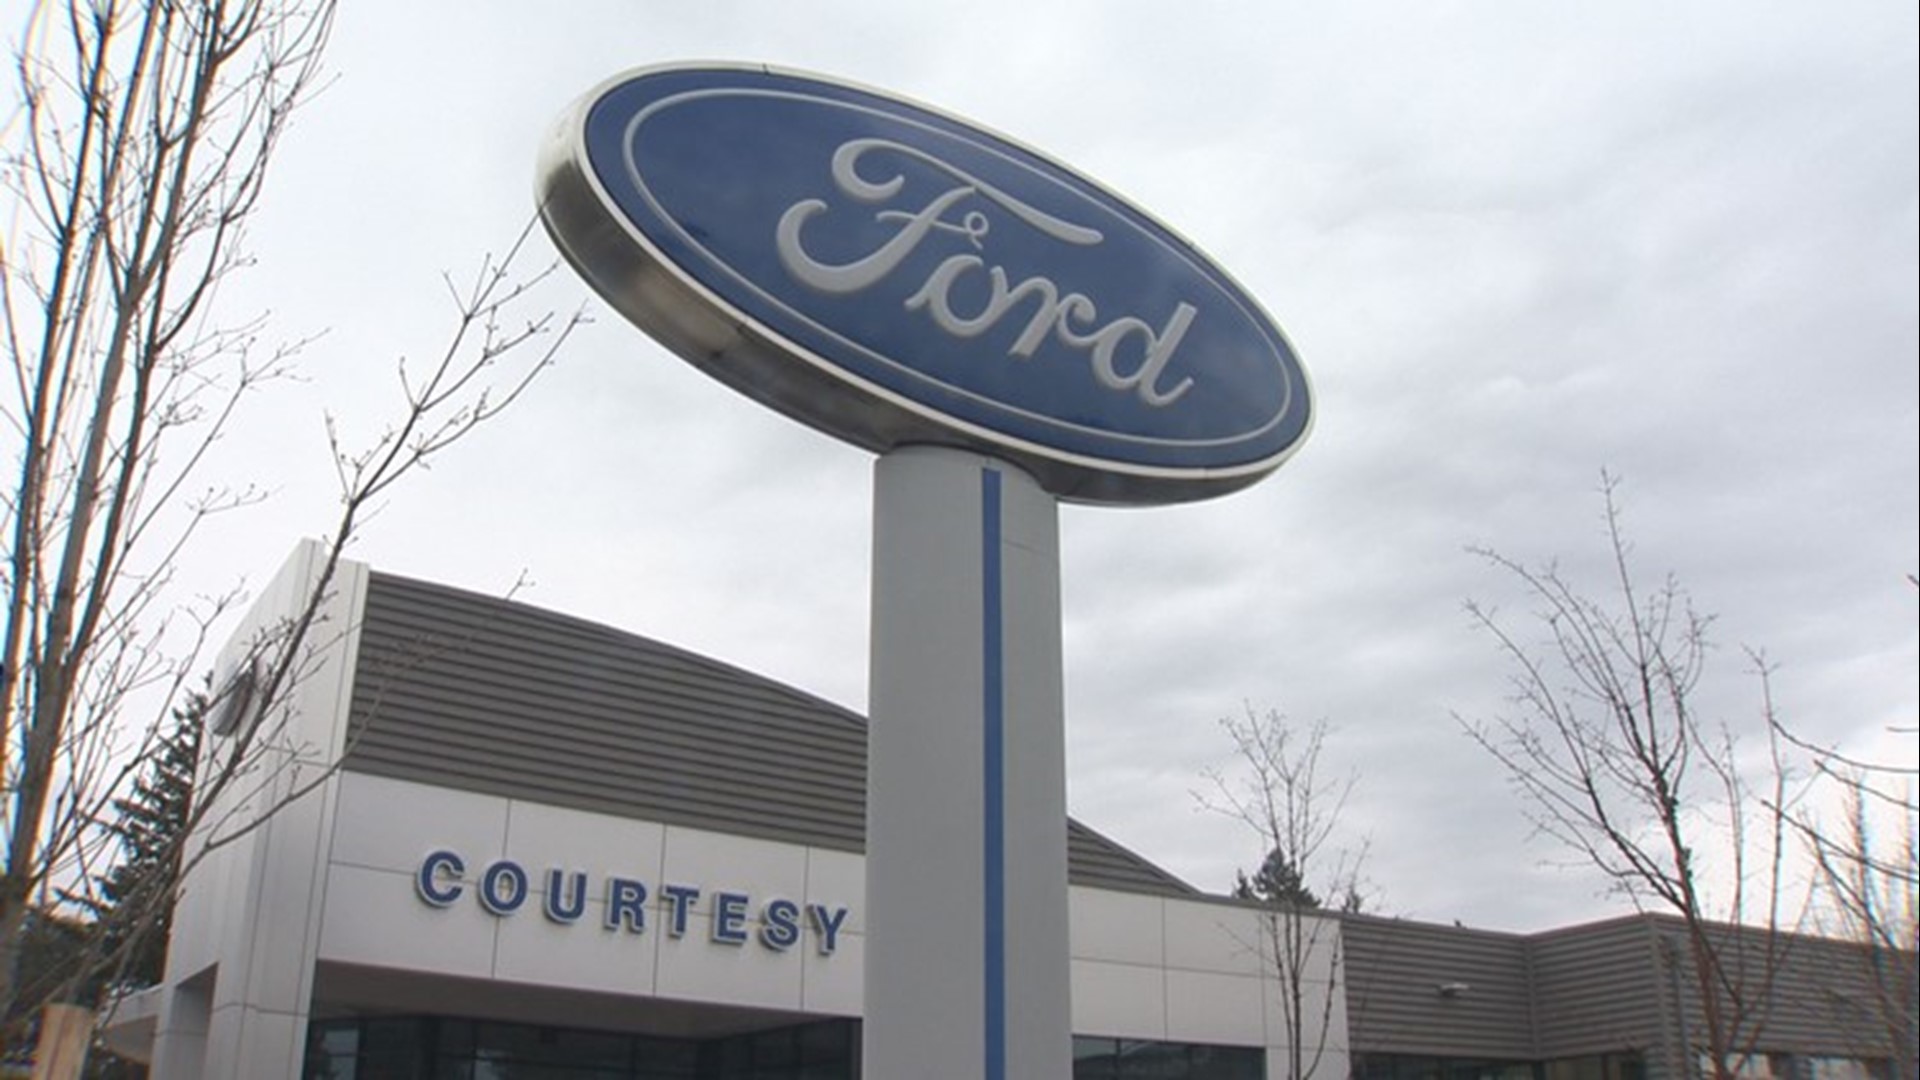 An update on a Ford dealership accused of misleading buyers